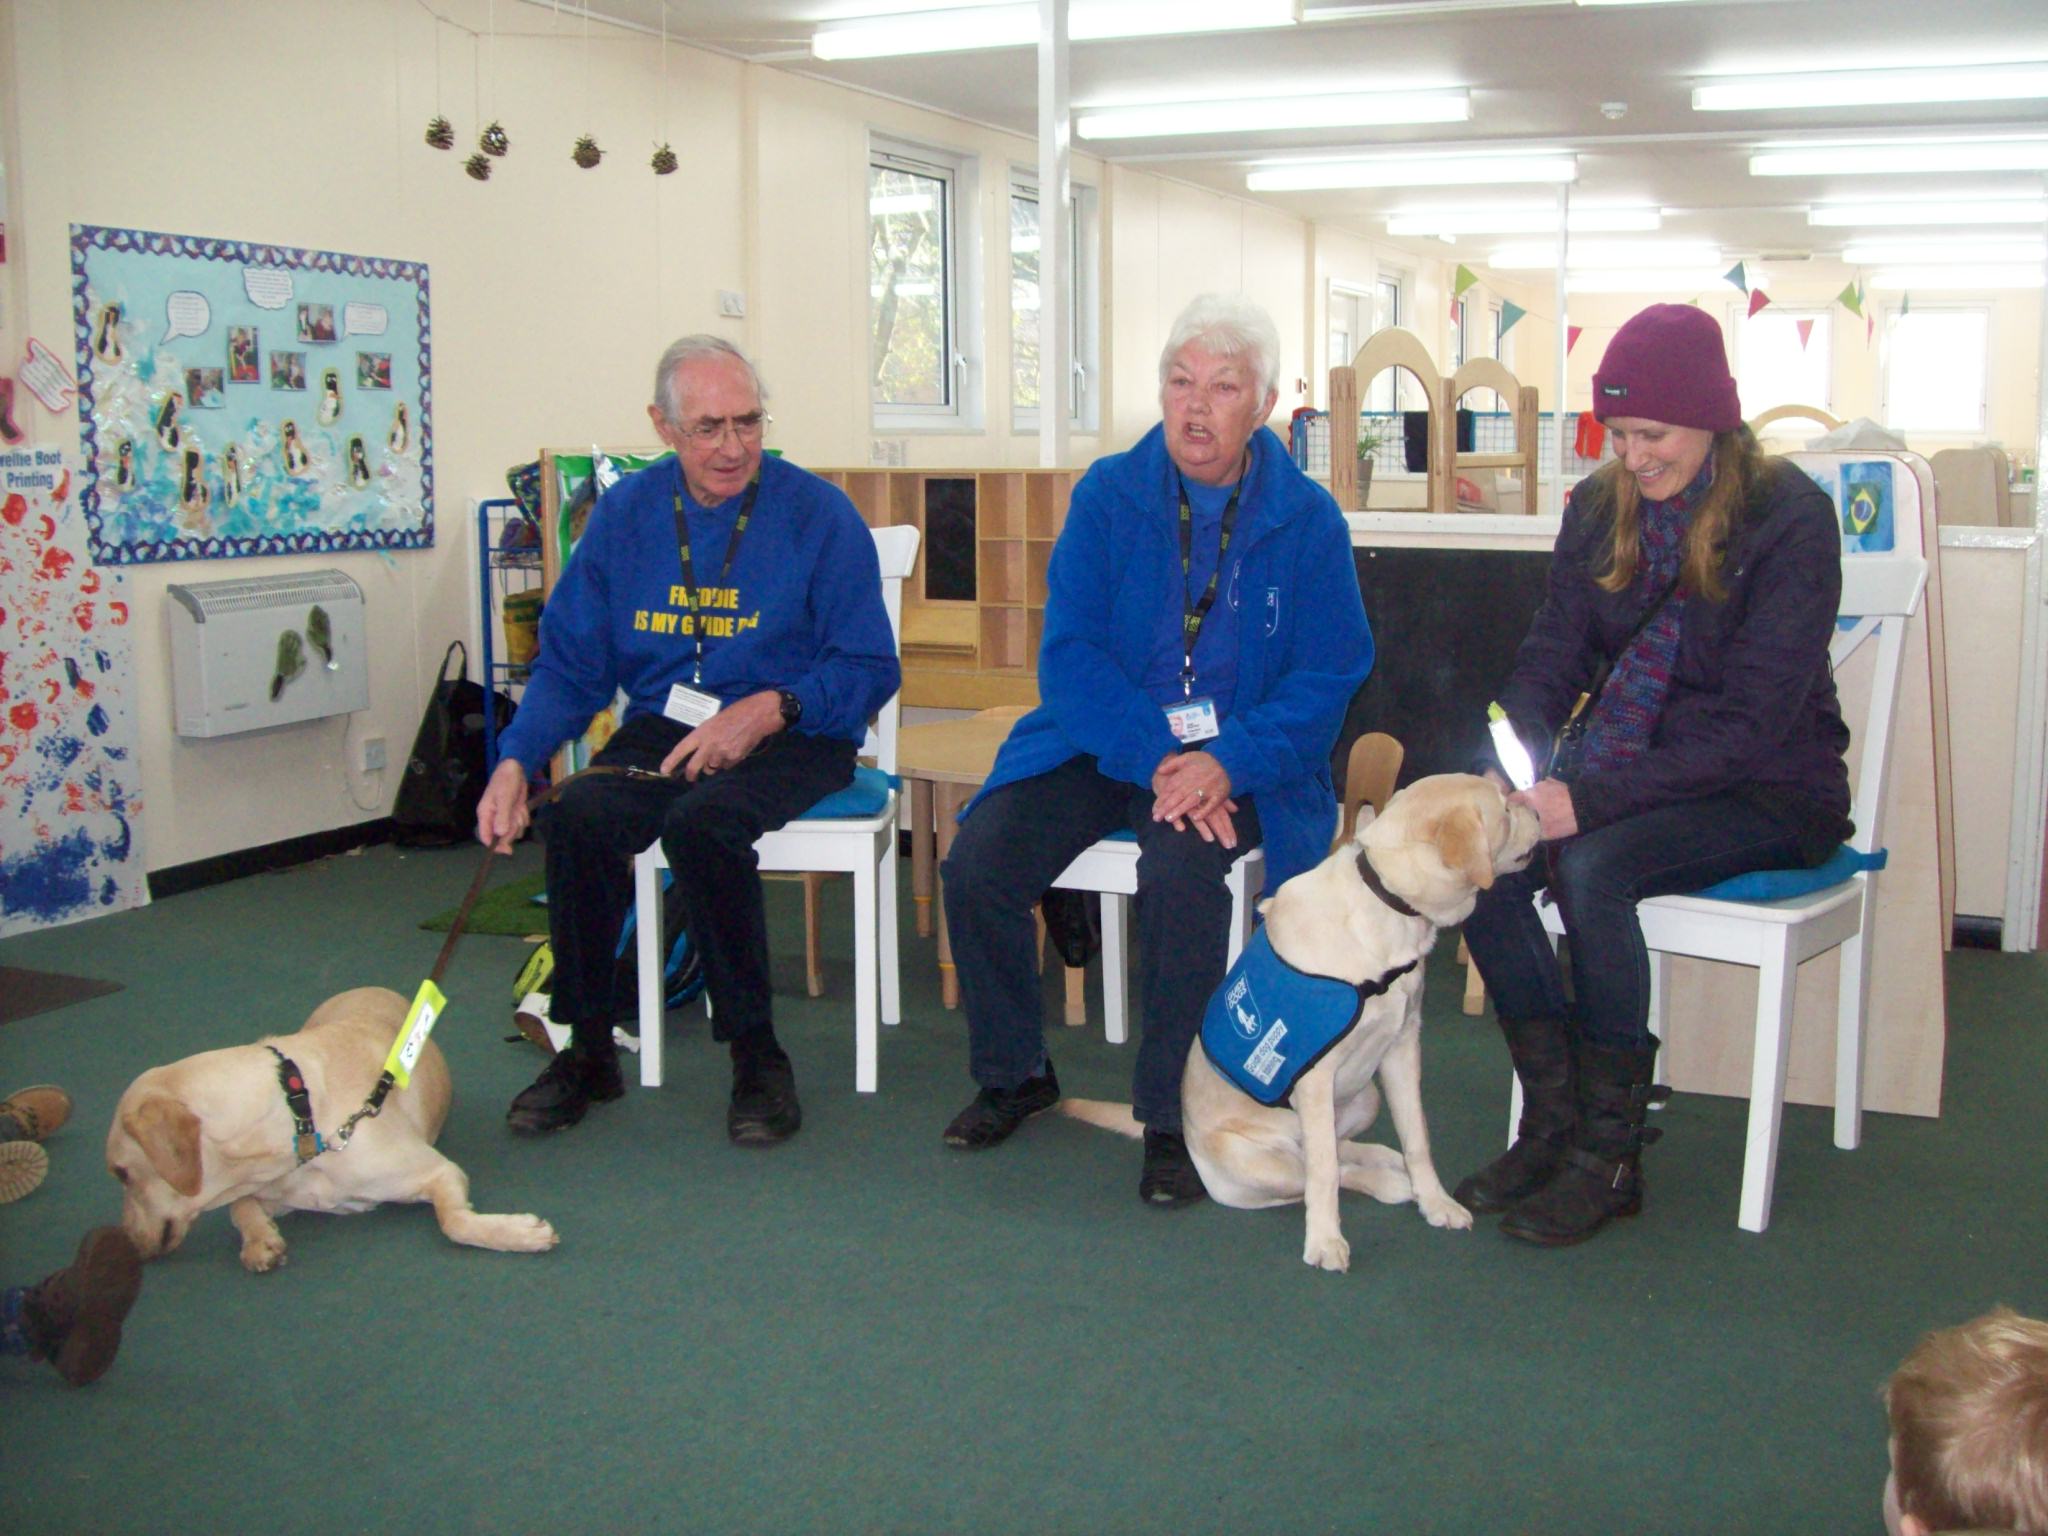 Guide dogs help children learn about the world around them.